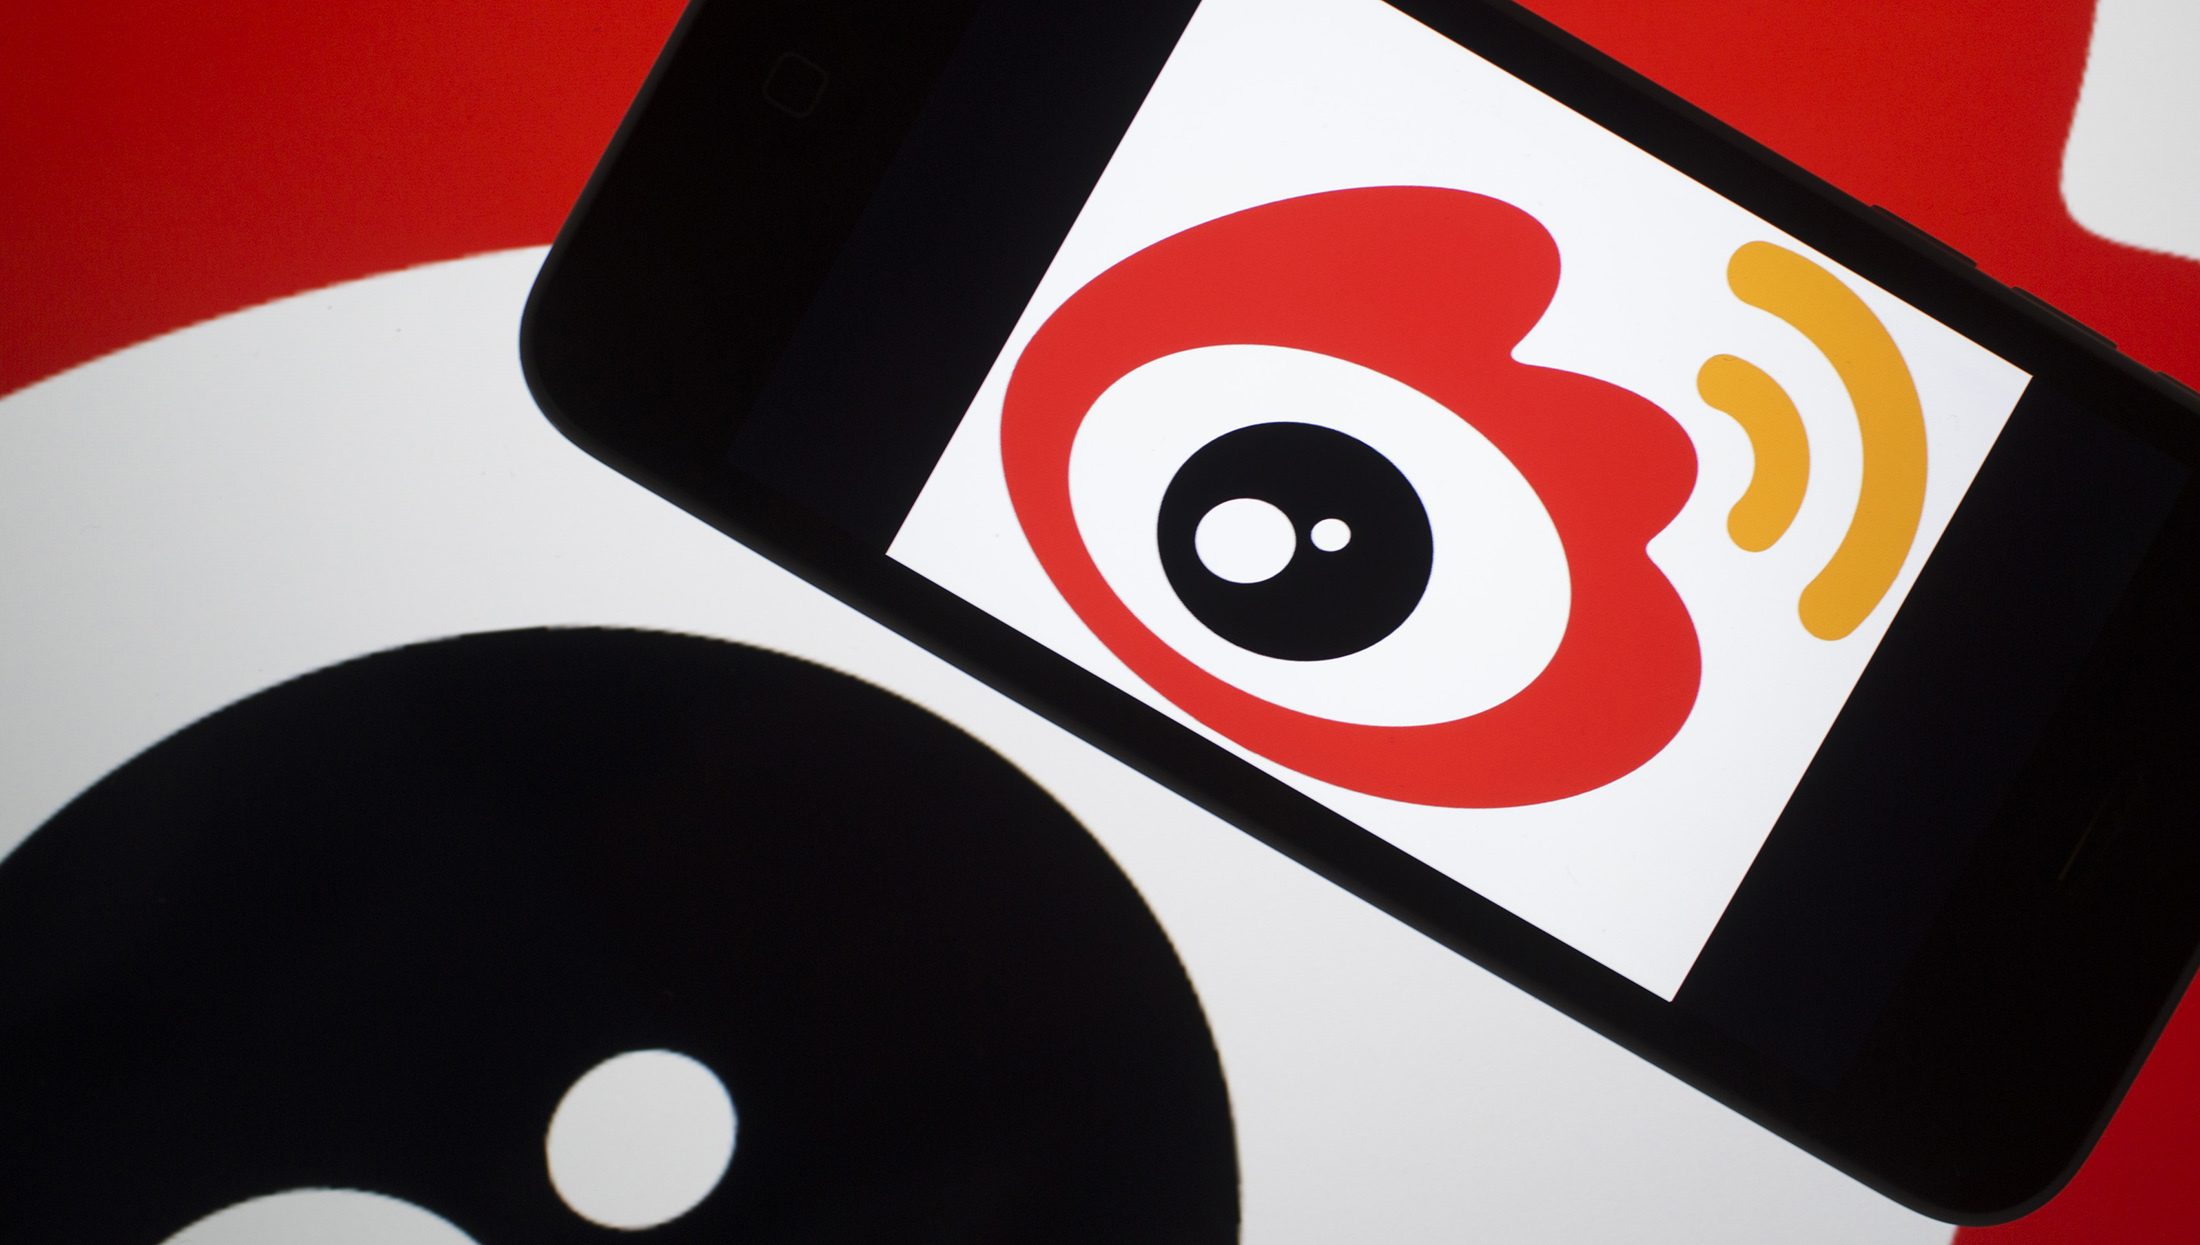 Weibo-owner Sina gets buyout bid at 12% premium from CEO-led entity